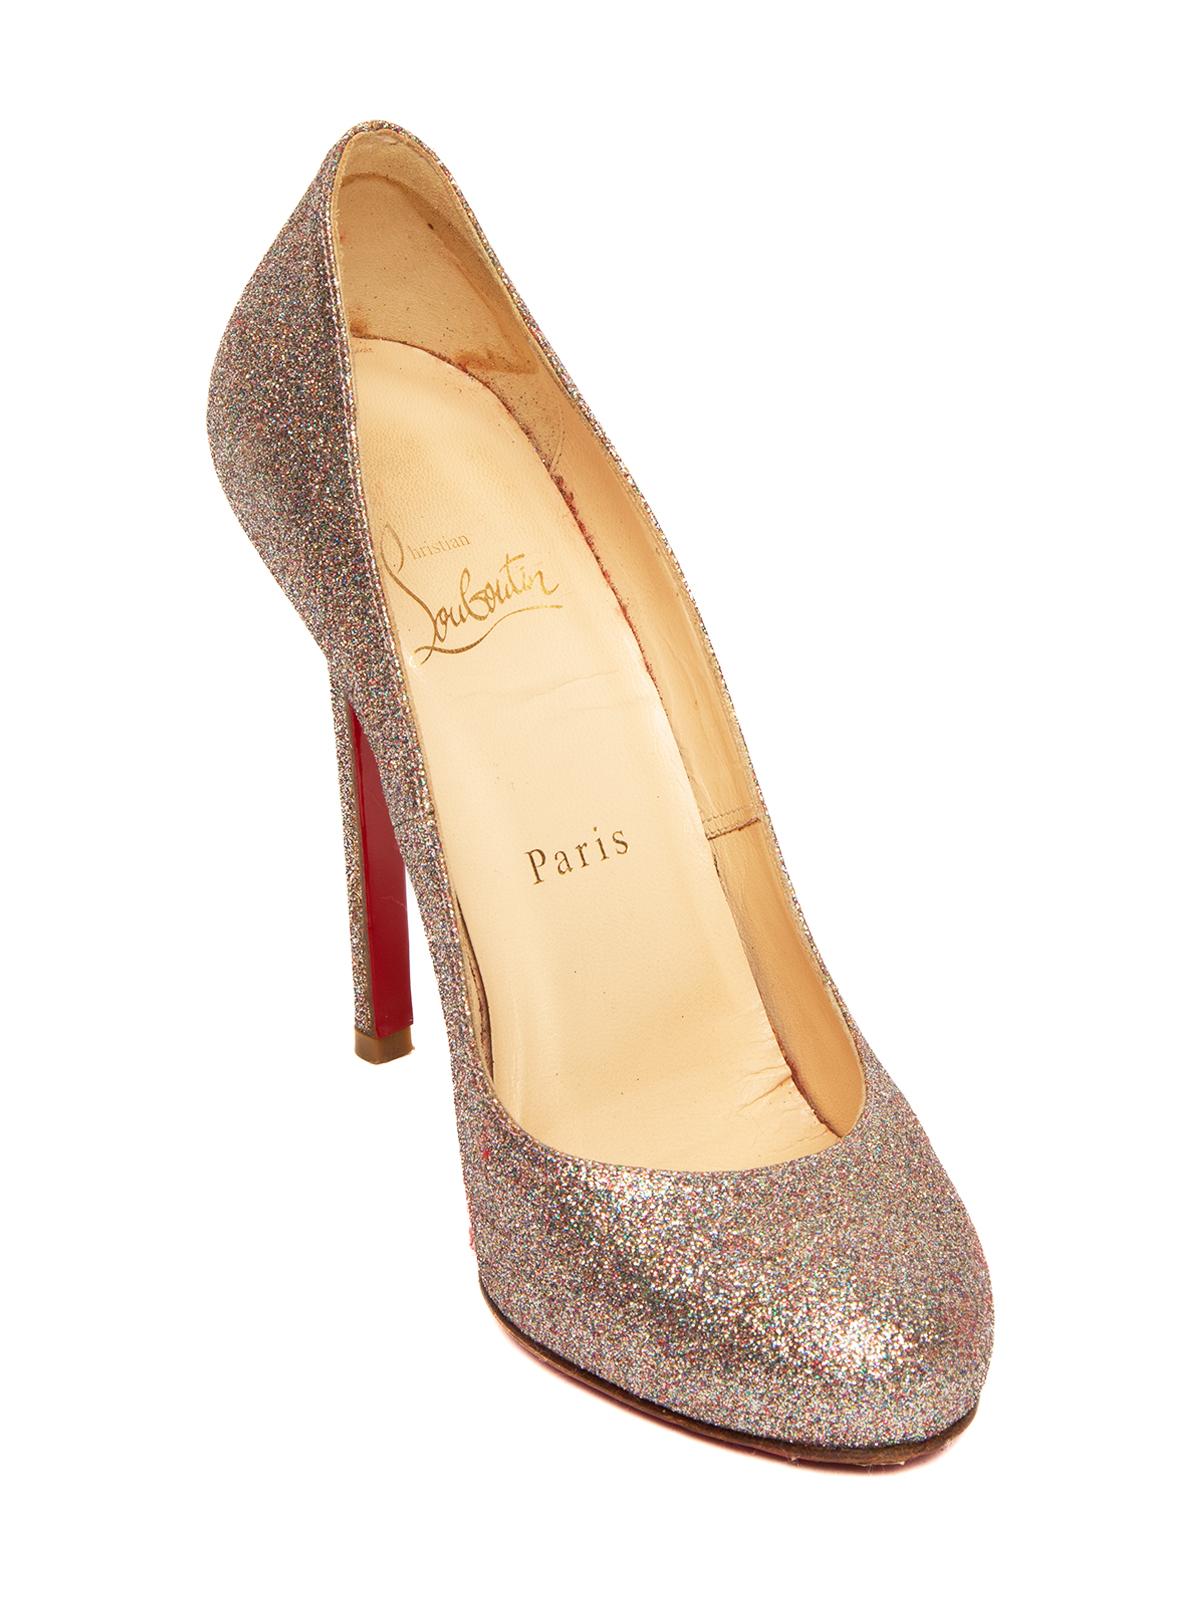 CONDITION is very good. Minimal wear to heel is evident. Some discolouration on this used Christian Louboutin designer resale item. Details Gold Material High heel Round toe Stiletto Signature used Christian Louboutin red outsoles Leather insoles